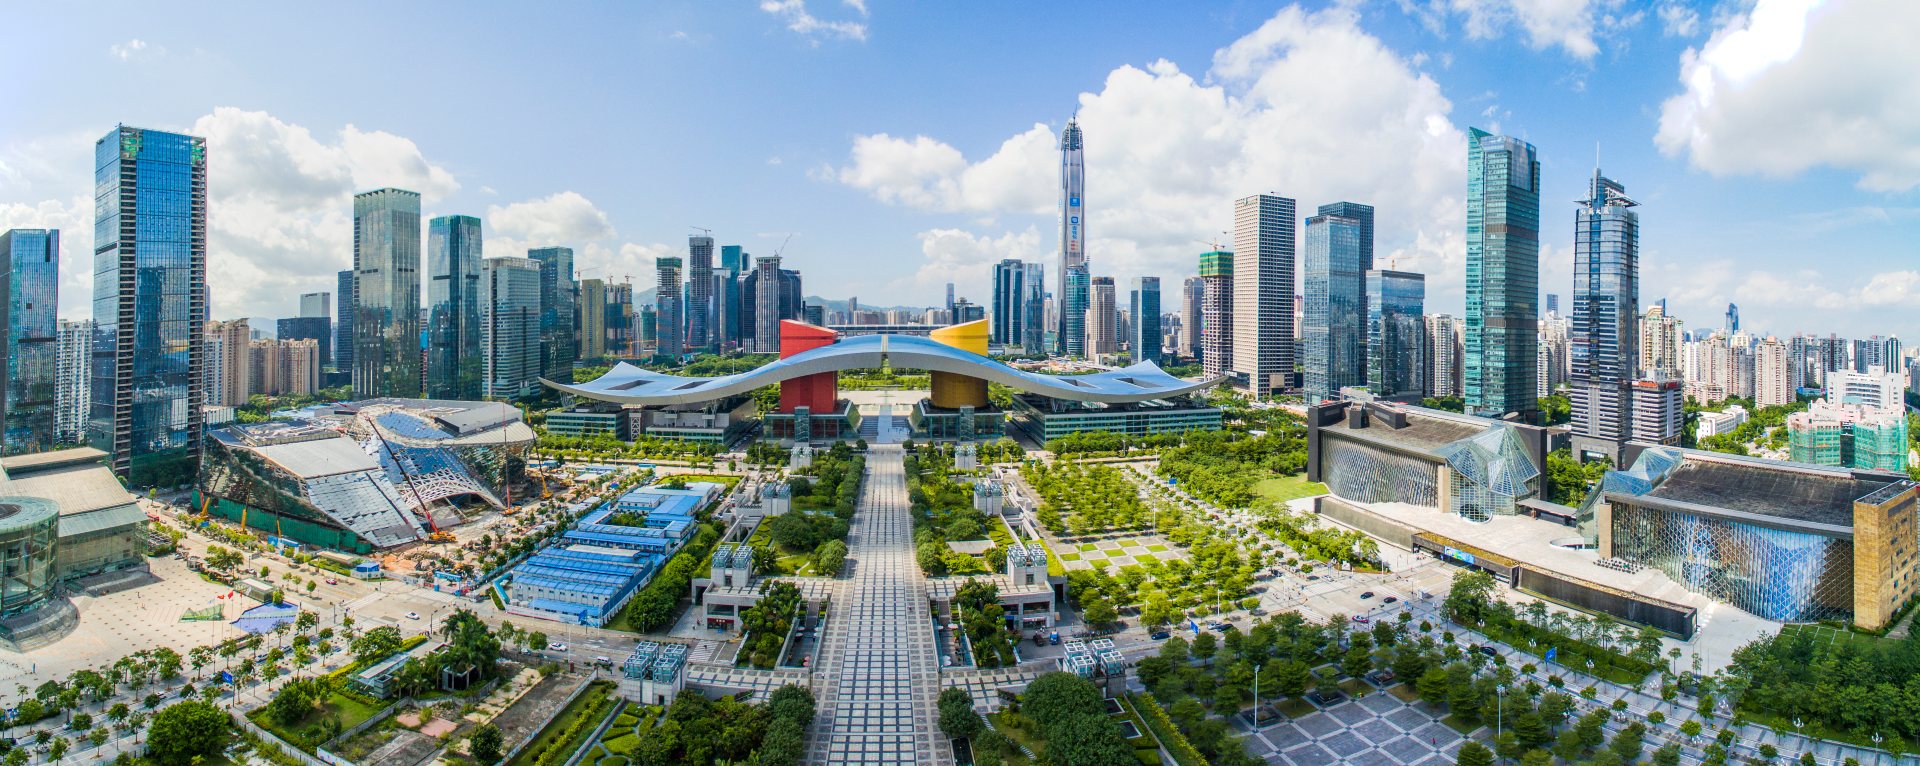 The city of the future: sustainable urban development 